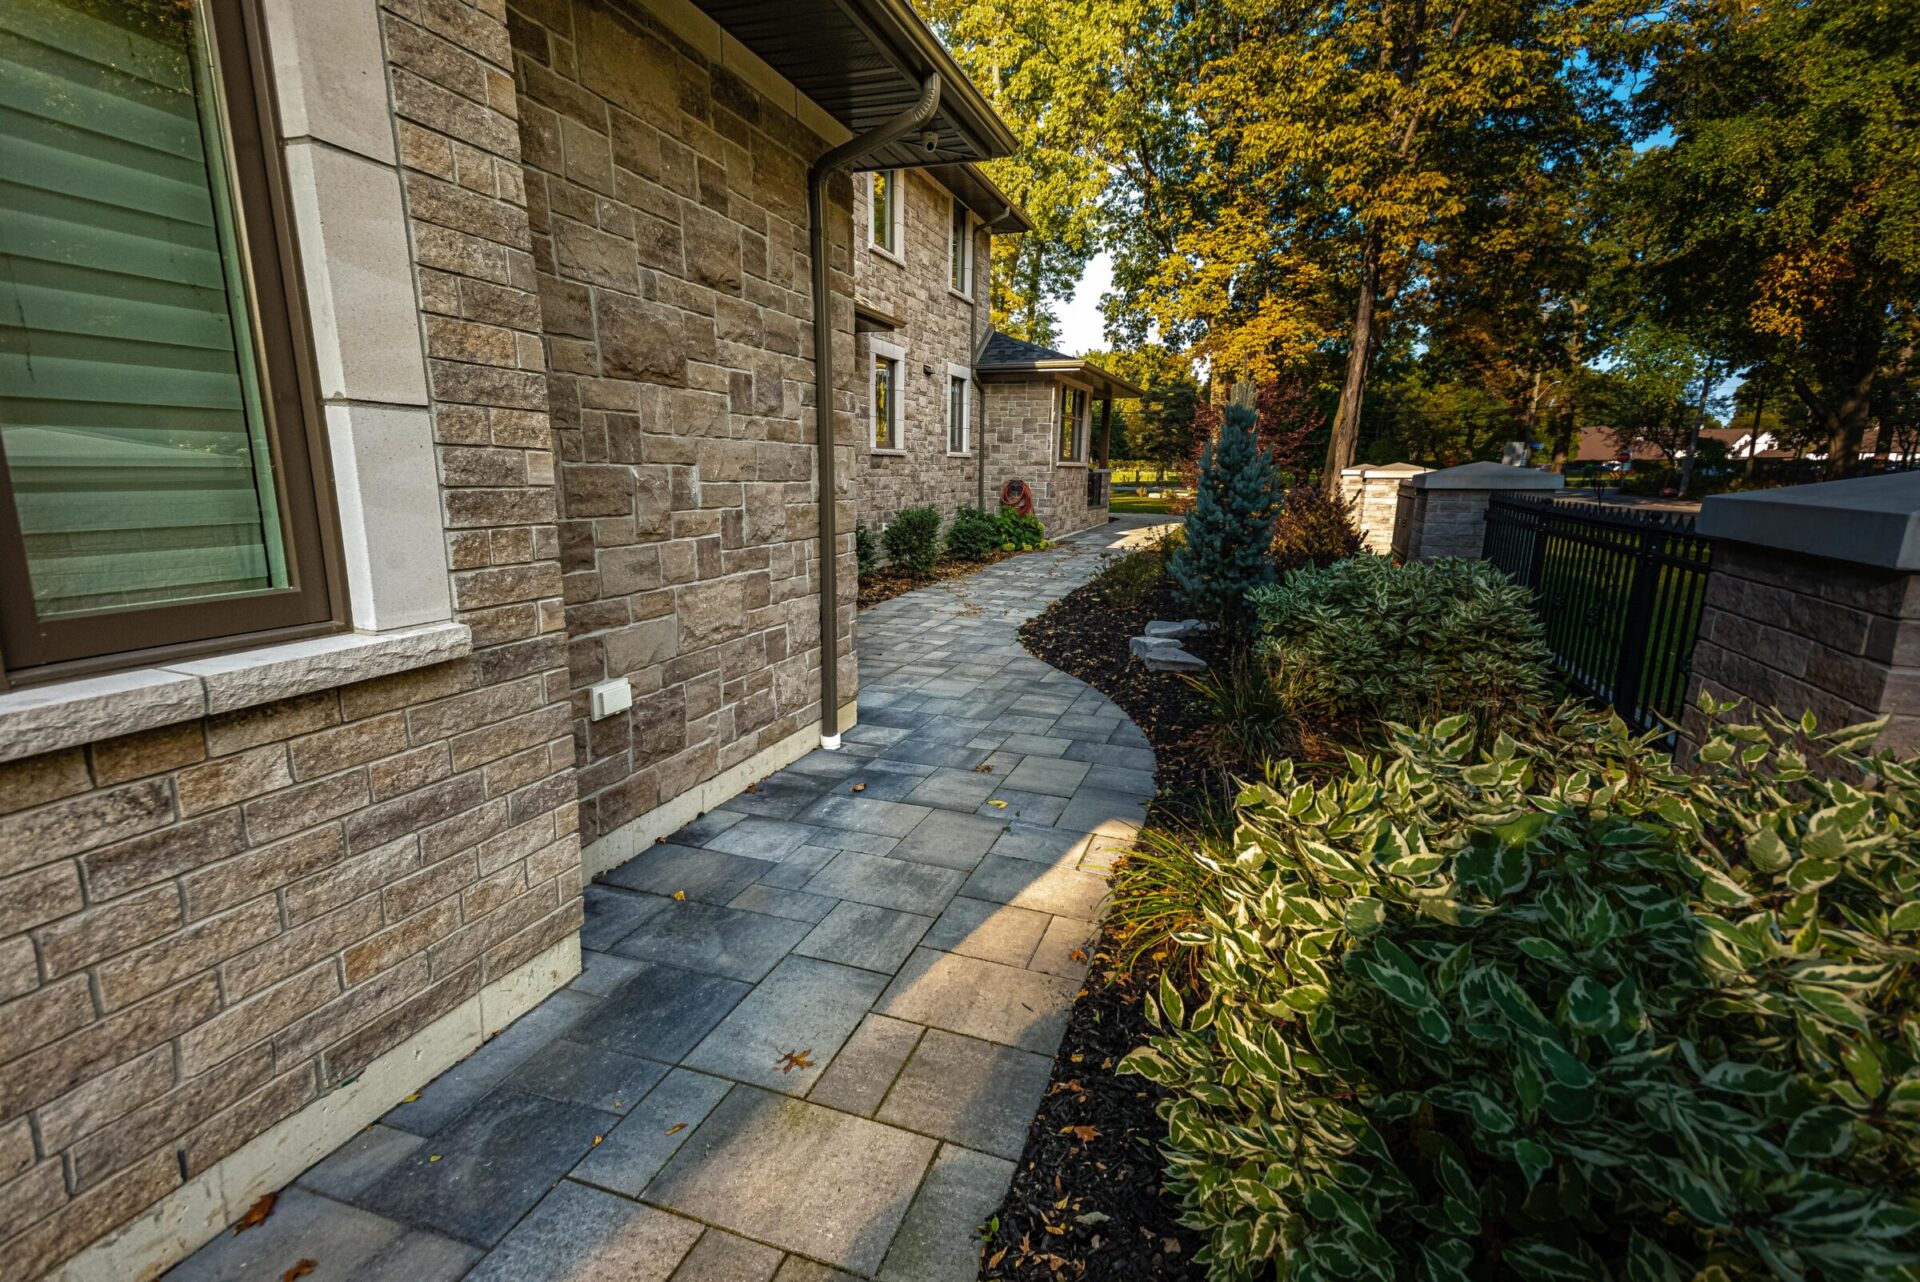 A curved stone walkway leads to a two-story residential house with brick exterior, flanked by lush green shrubbery and mature trees under clear skies.